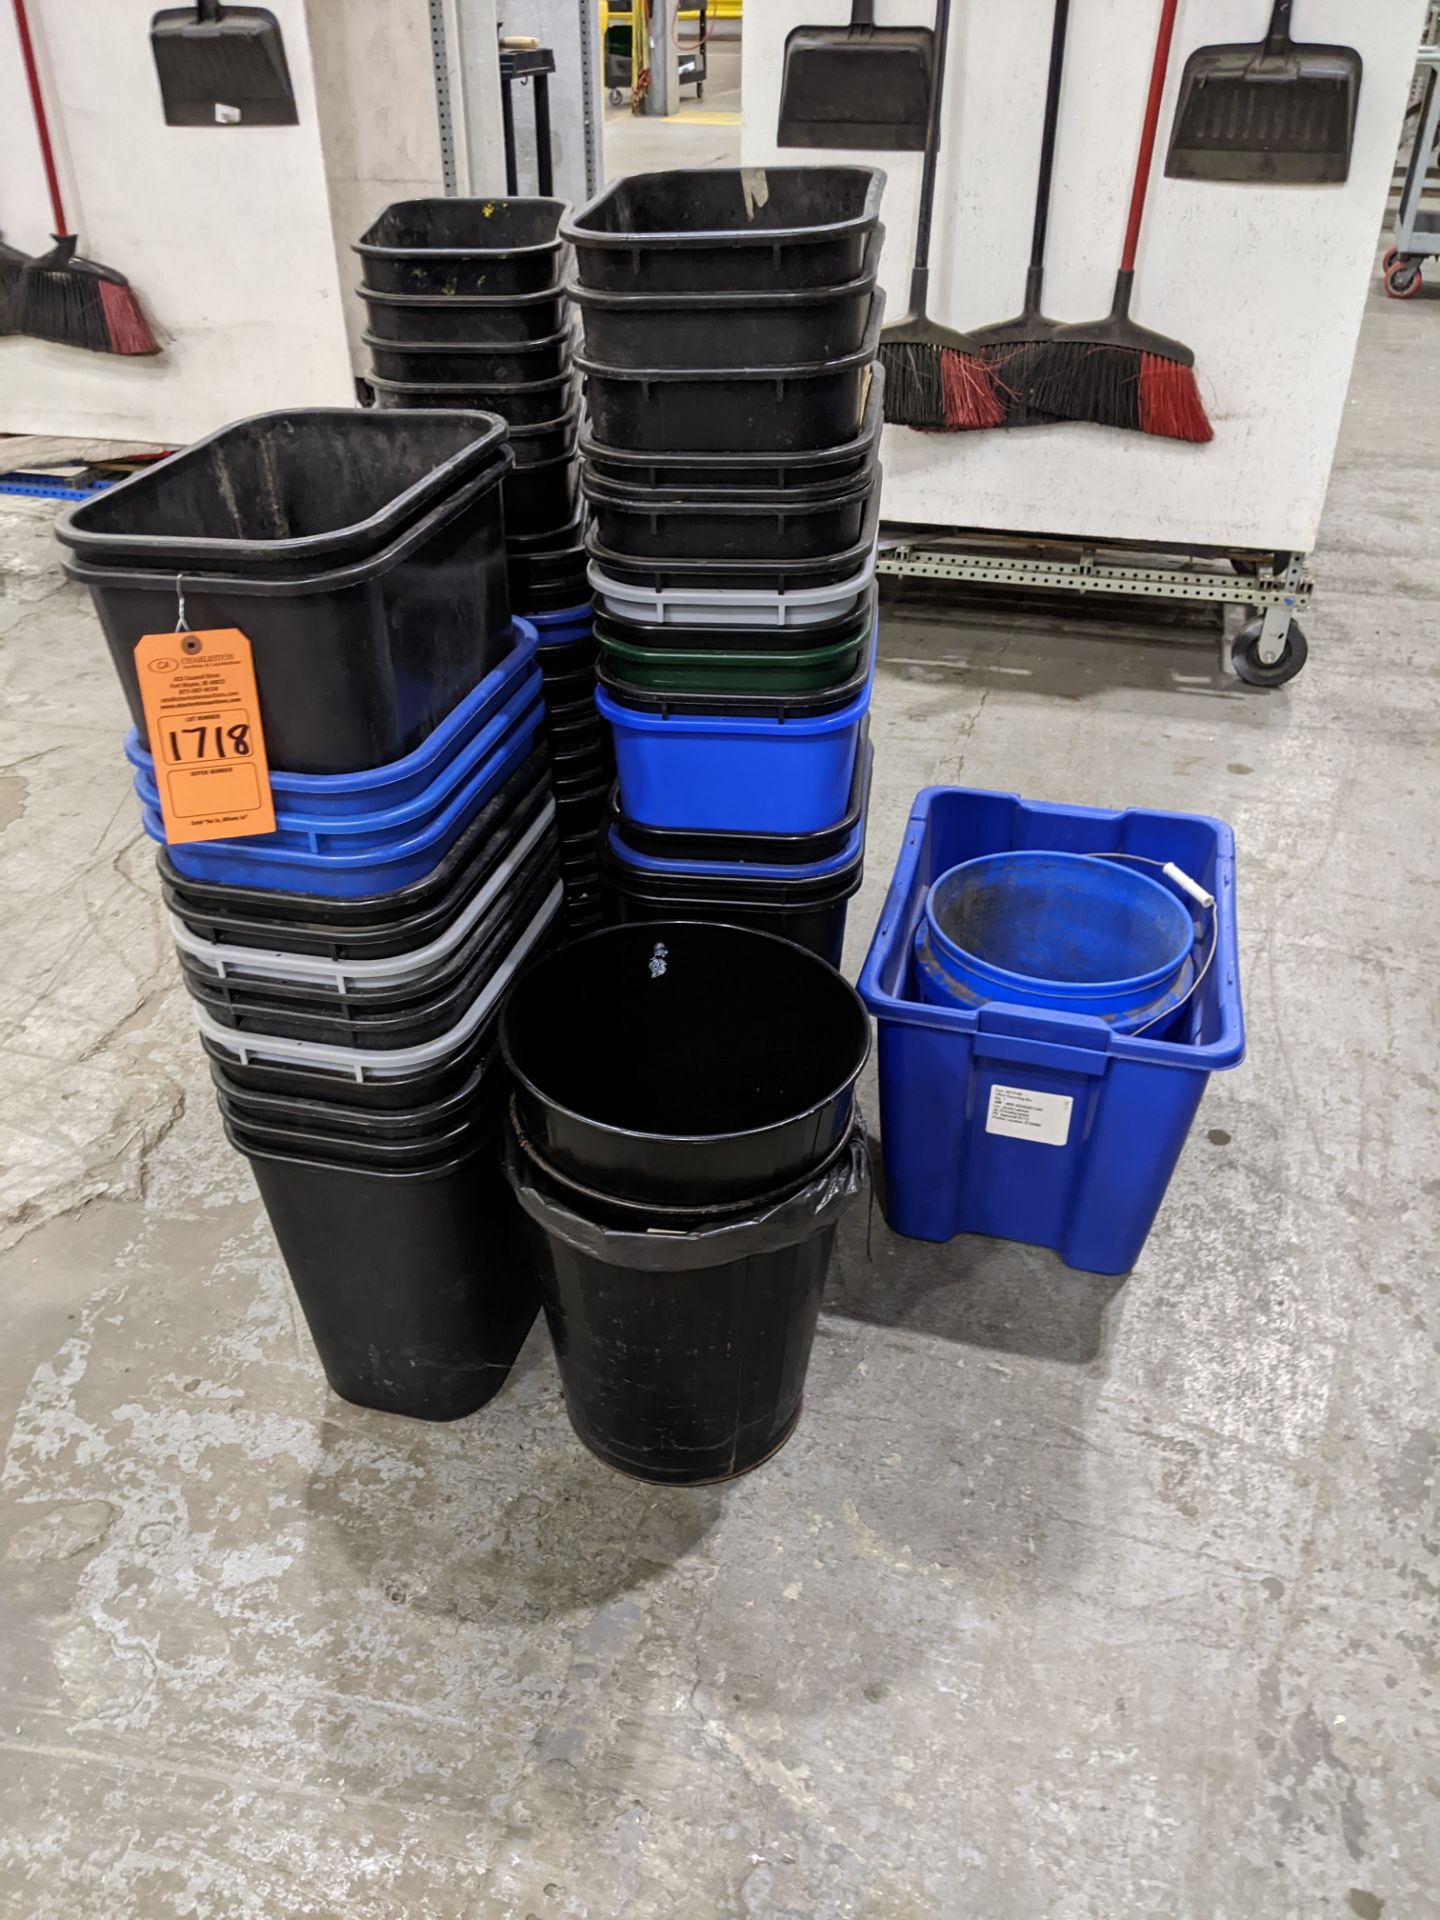 ASSORTED TRASH AND RECYCLING BINS